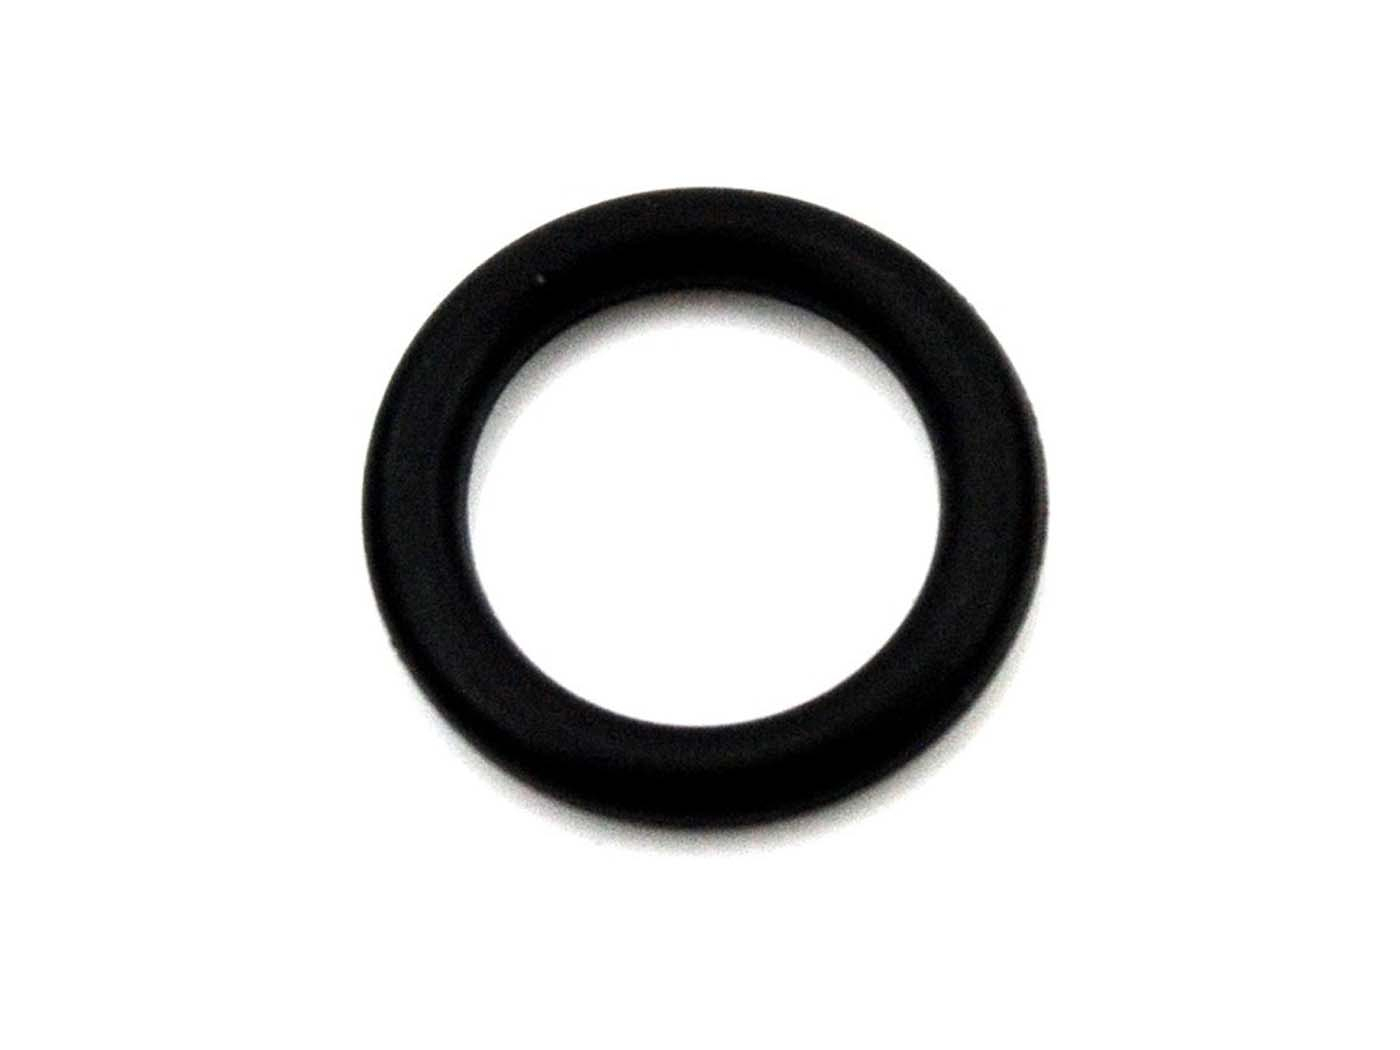 Clutch Lever Seal Dimension 11 X 2.5 Mm For C 50 Sport Type 517, 529, Super 441, GTS KS 530, CS 25, 50, CX, Hai, 448, R Scooter, RS Scooter 561, Star 1, 2